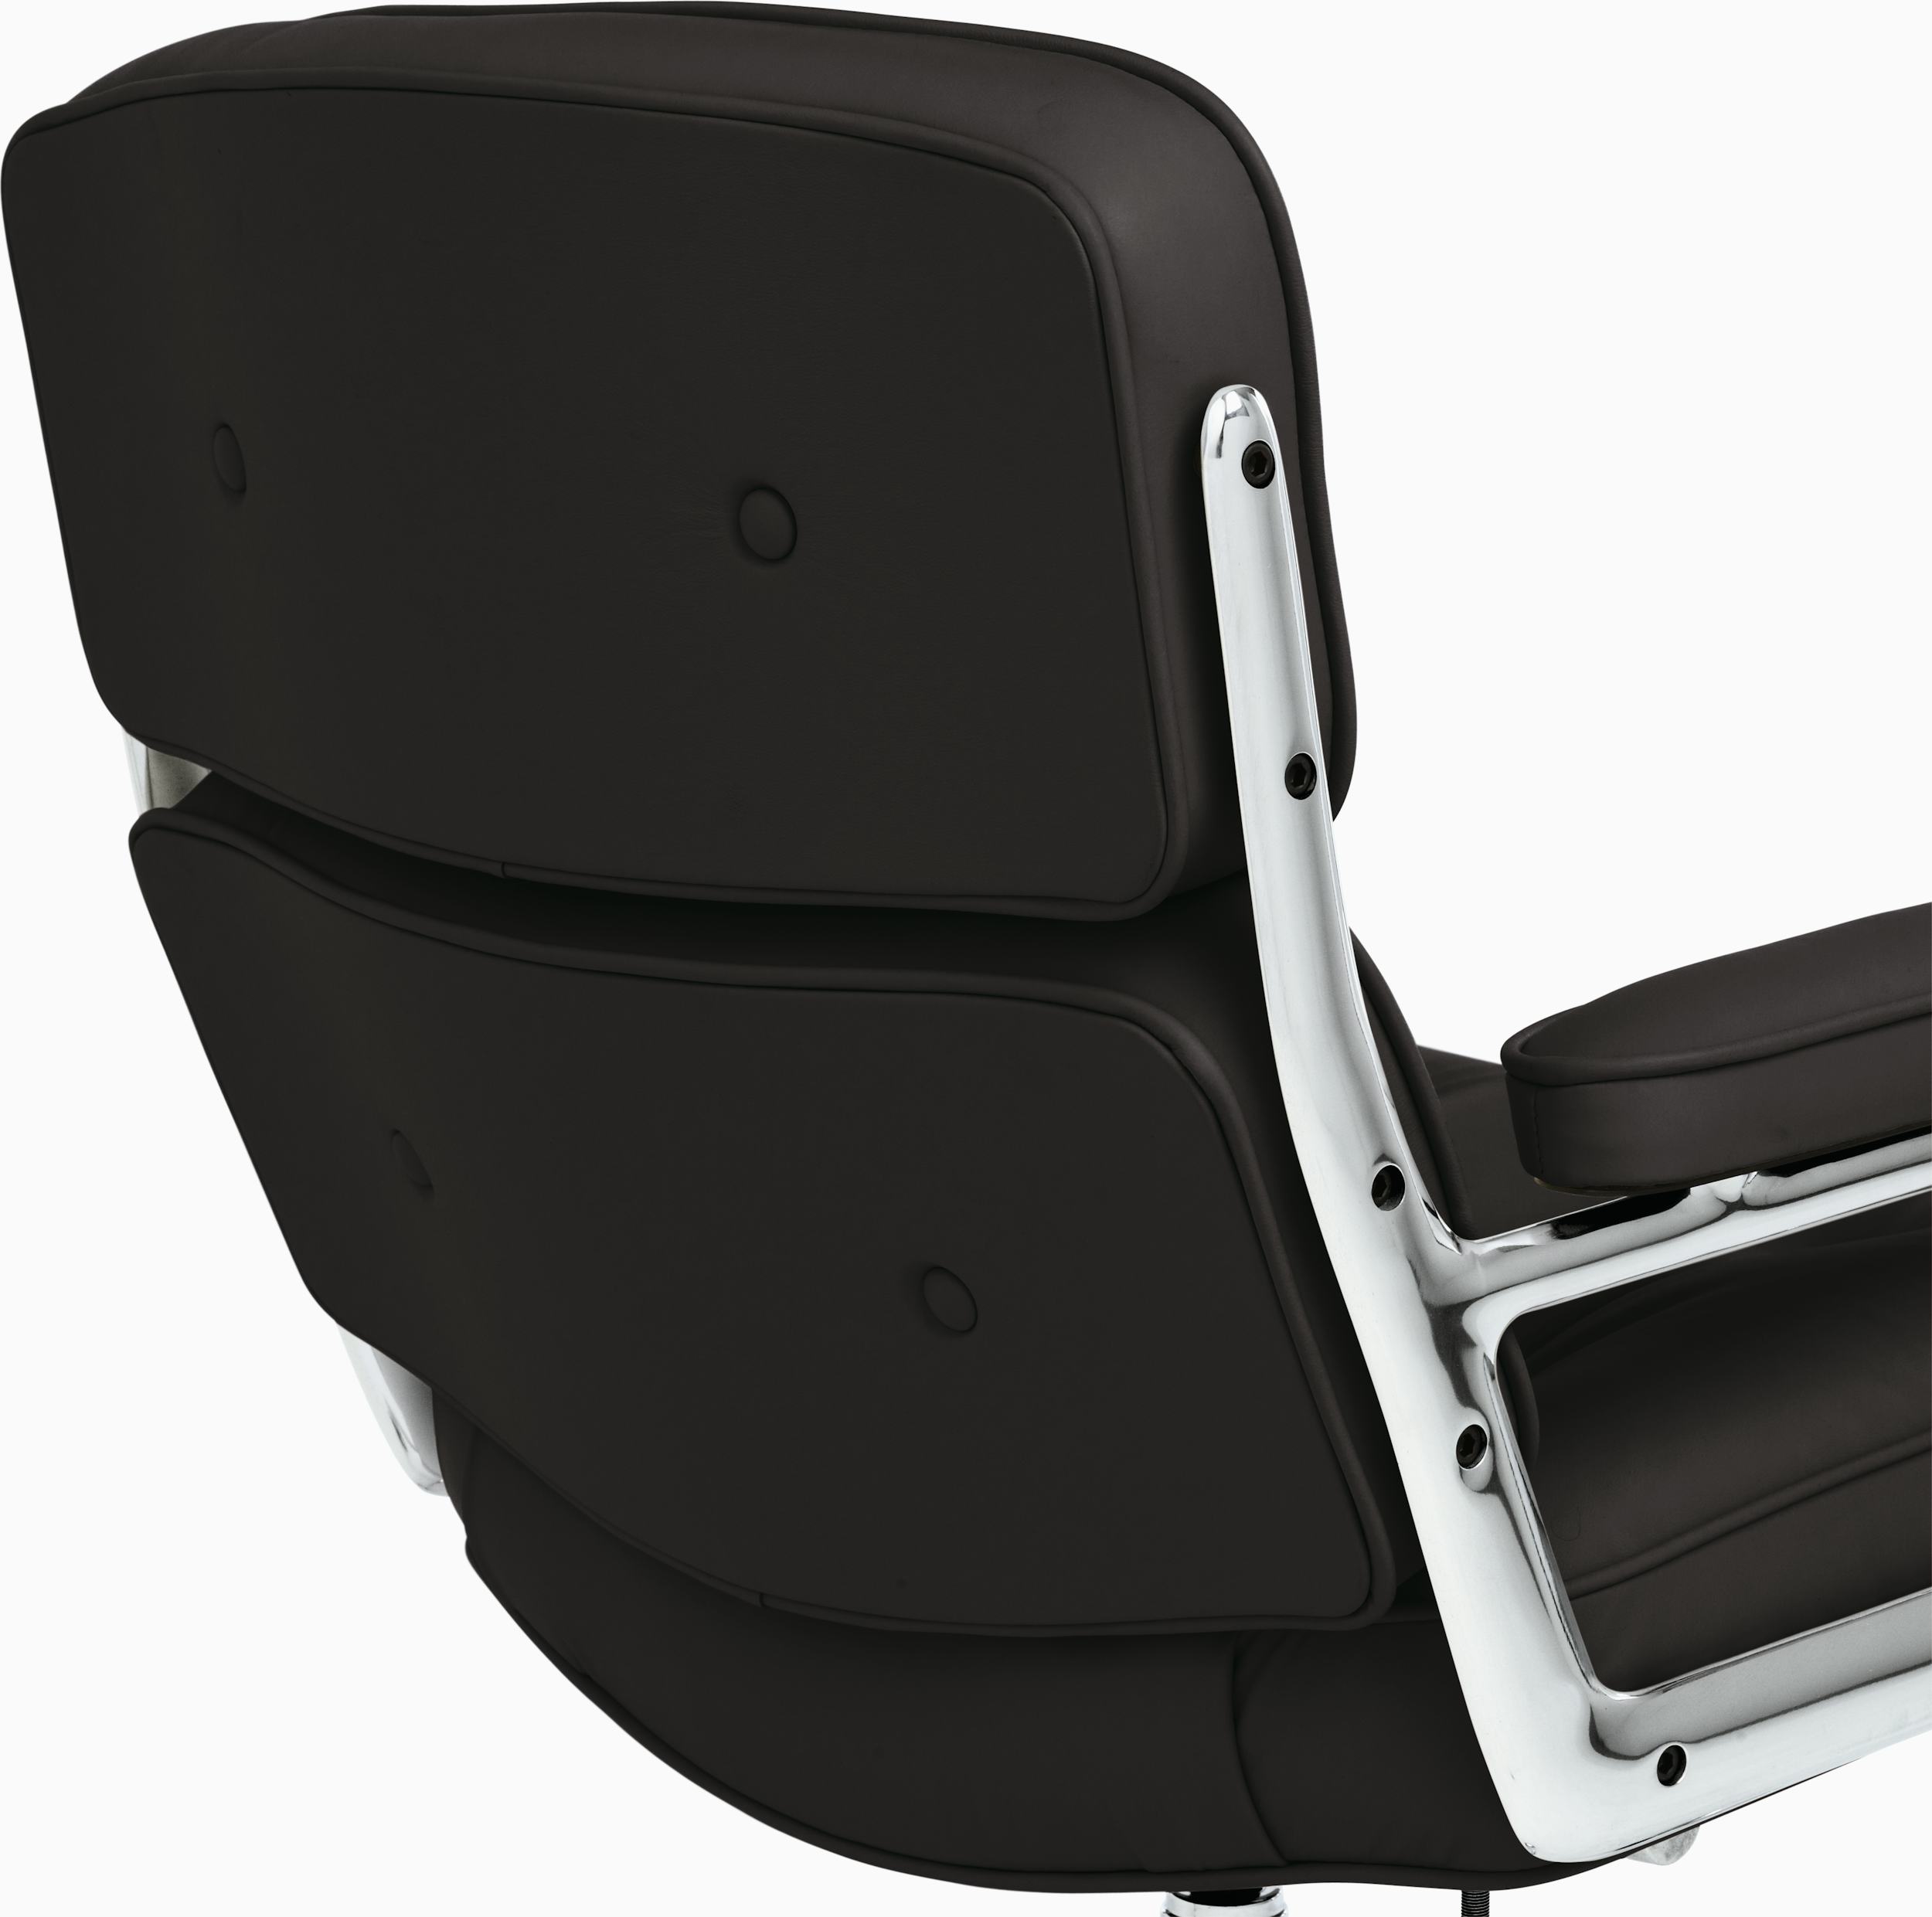 Eames Executive Chair – Herman Miller Store